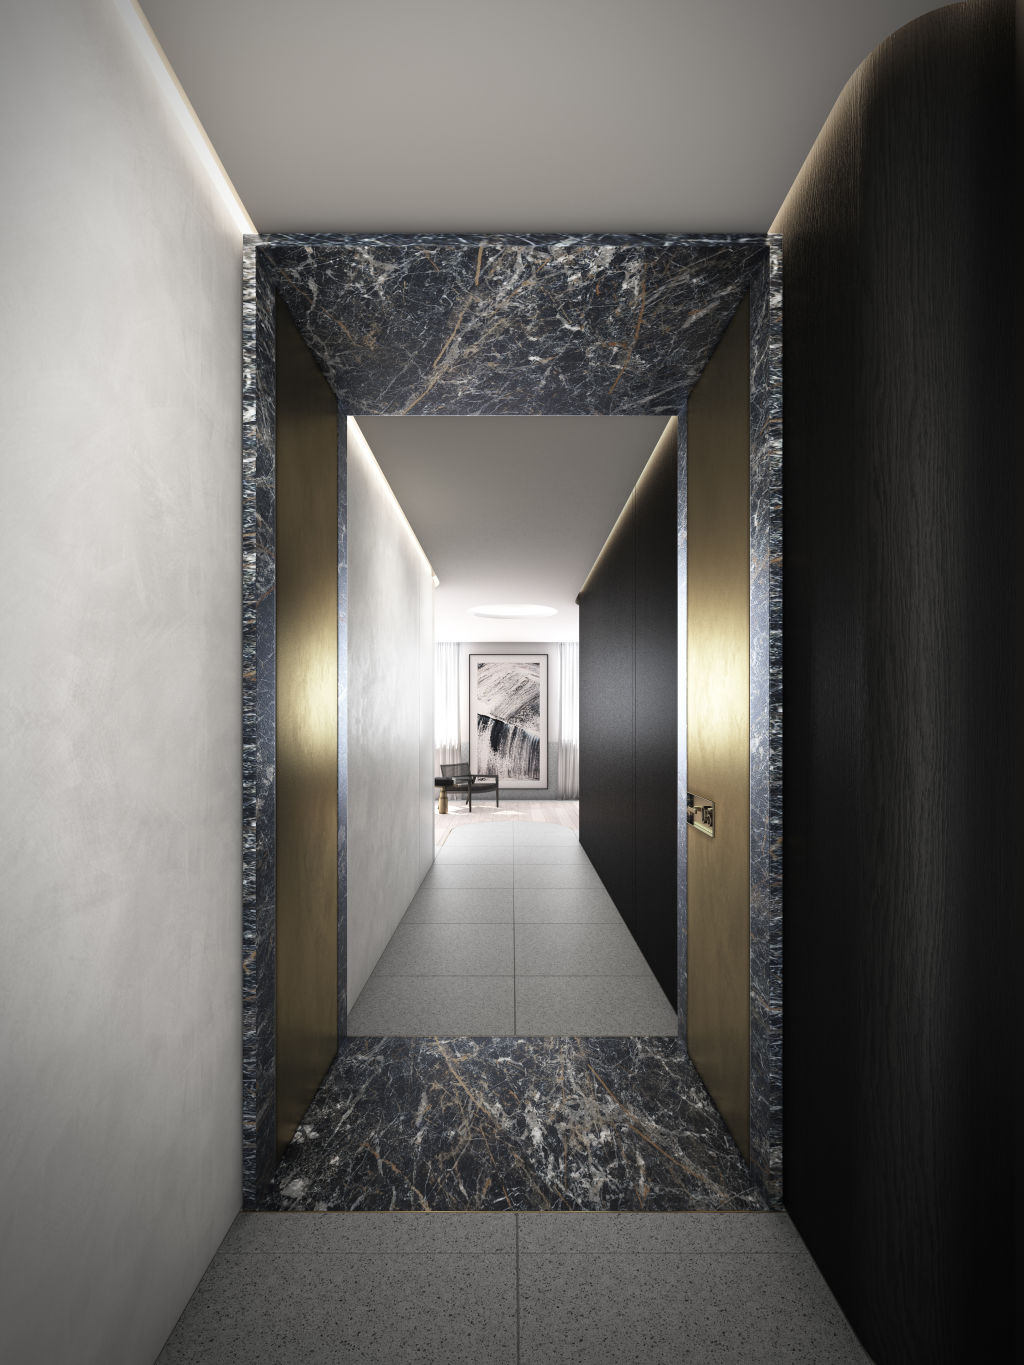 From marble to metallics, the apartments have been designed with top-end luxury in mind. Photo: Supplied